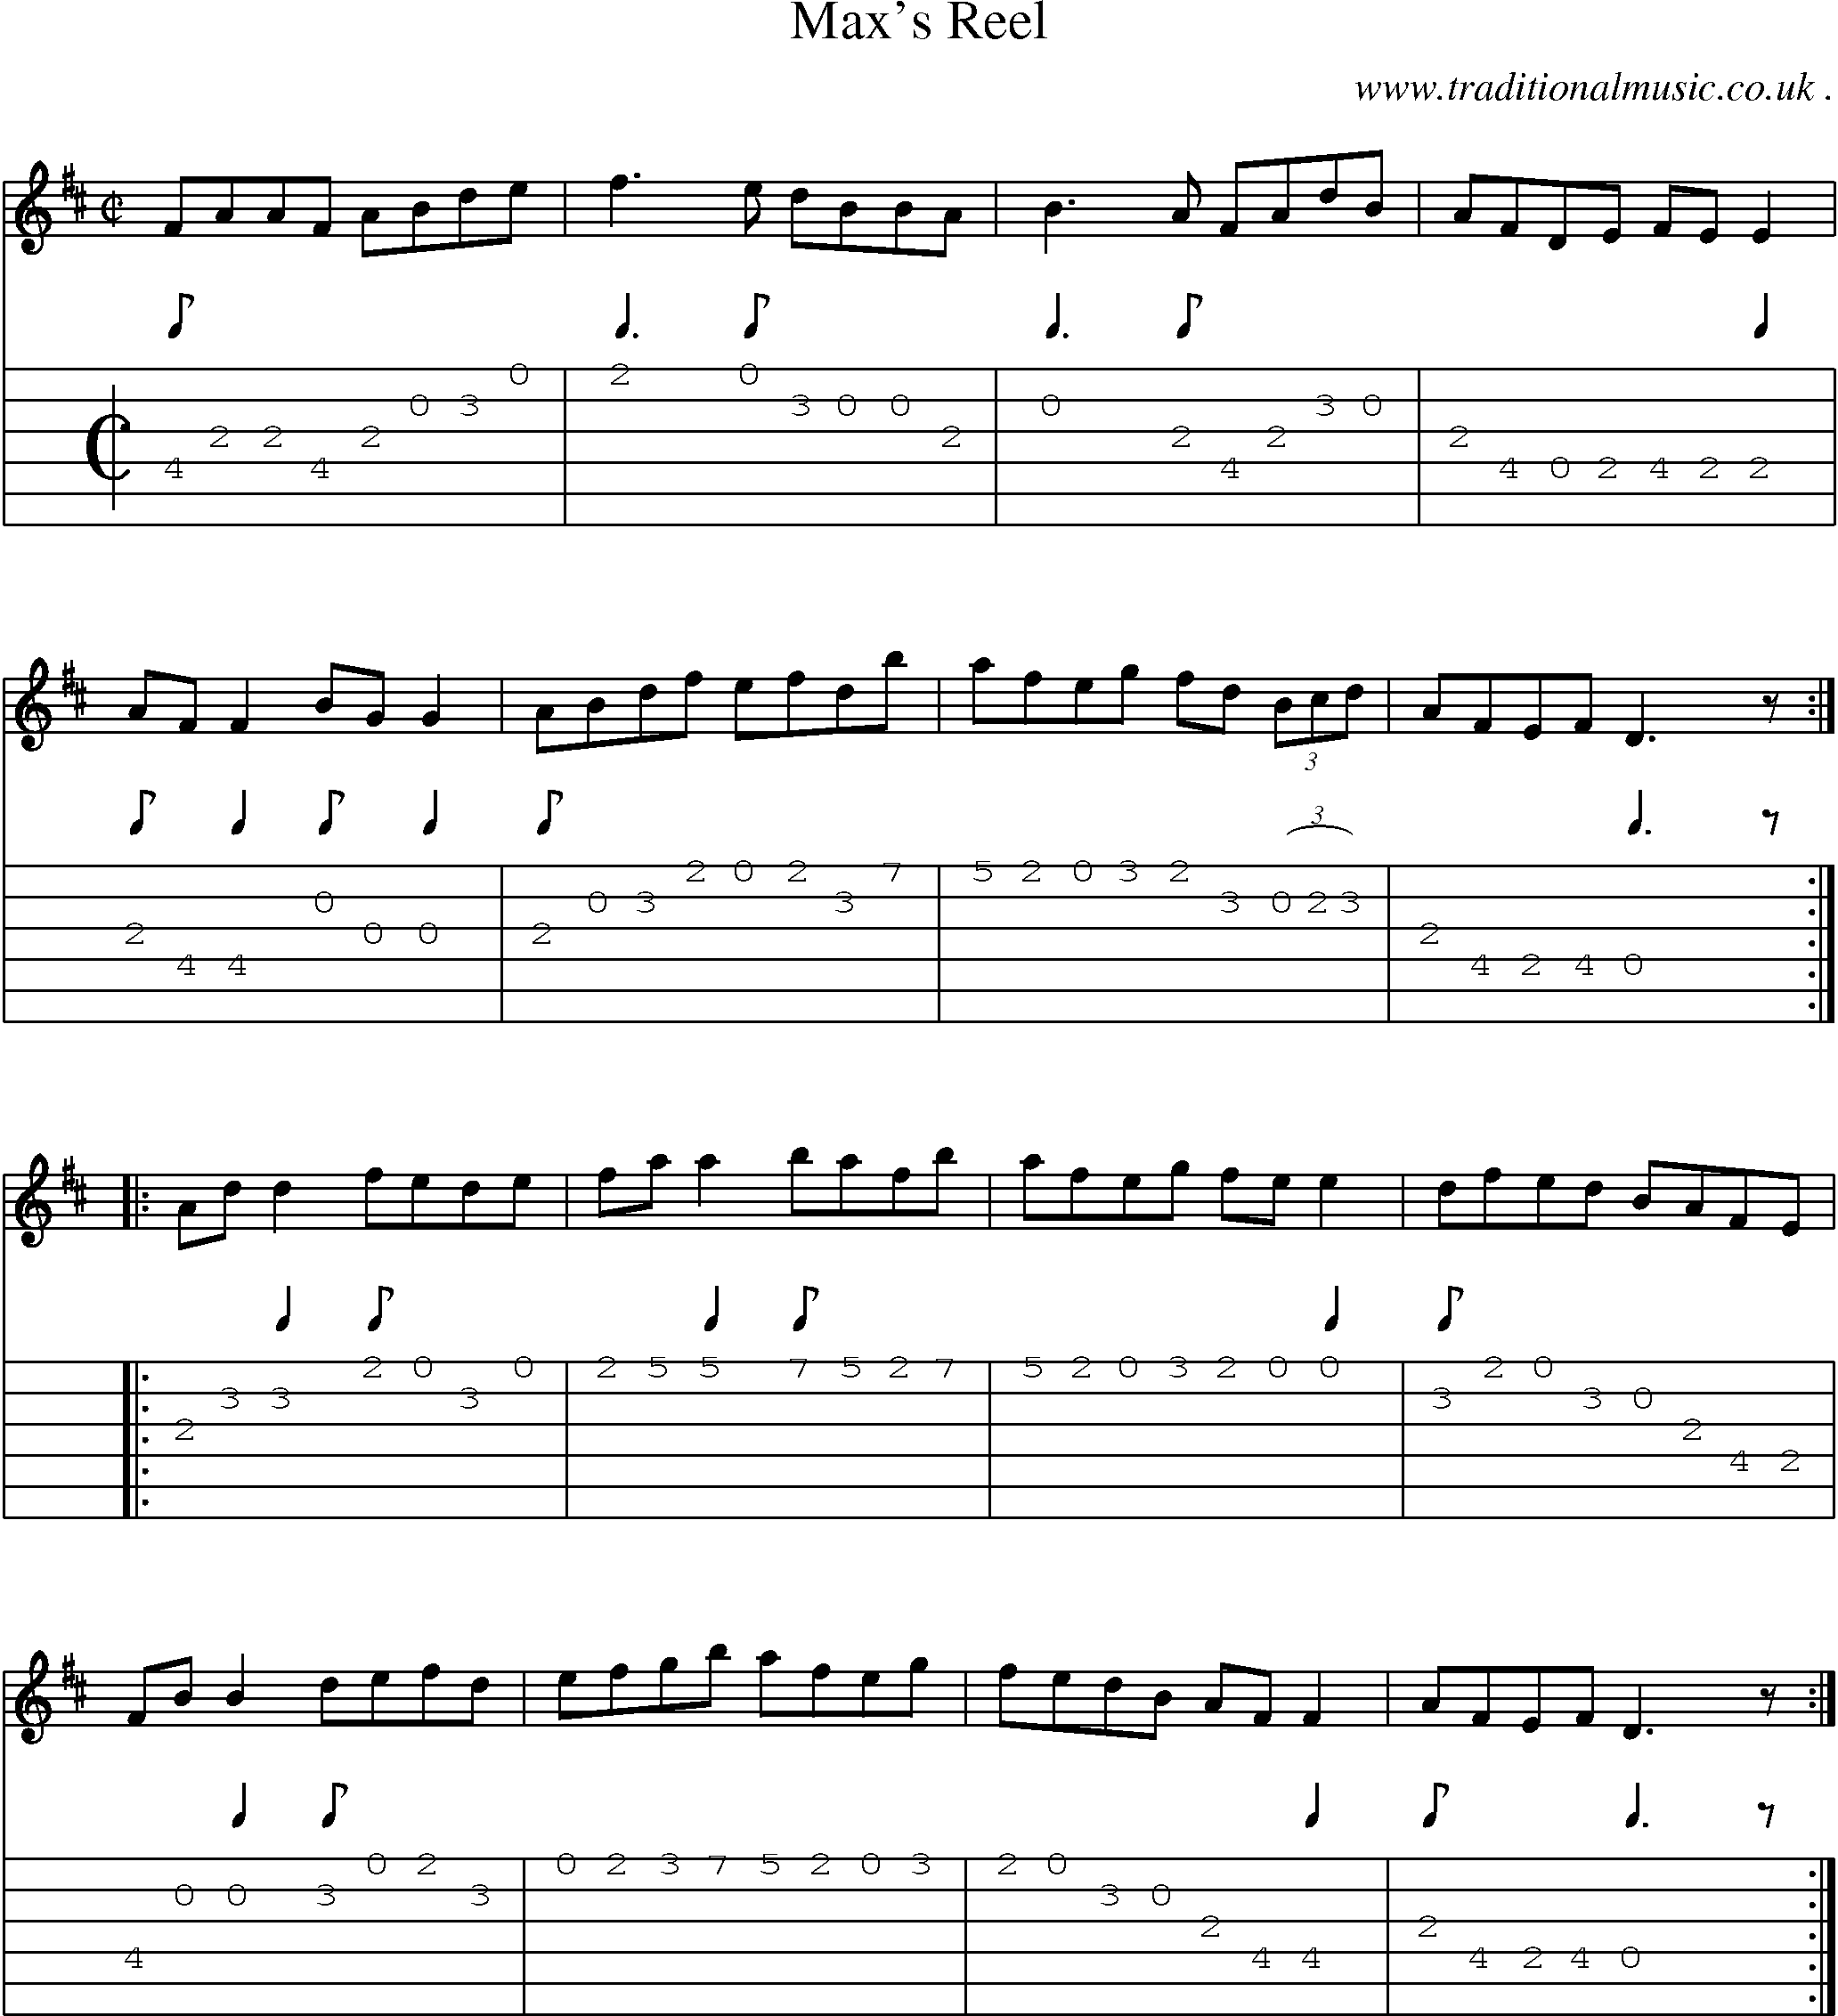 Sheet-Music and Guitar Tabs for Maxs Reel